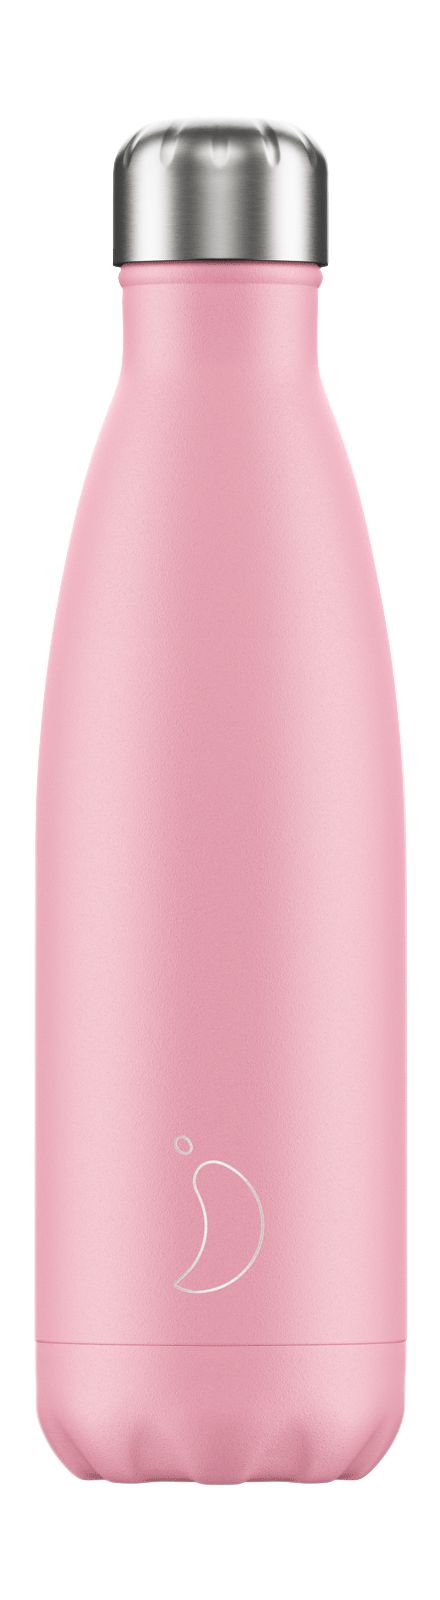 Chilly's Bottle All Pink Pastel 750 ml<br>